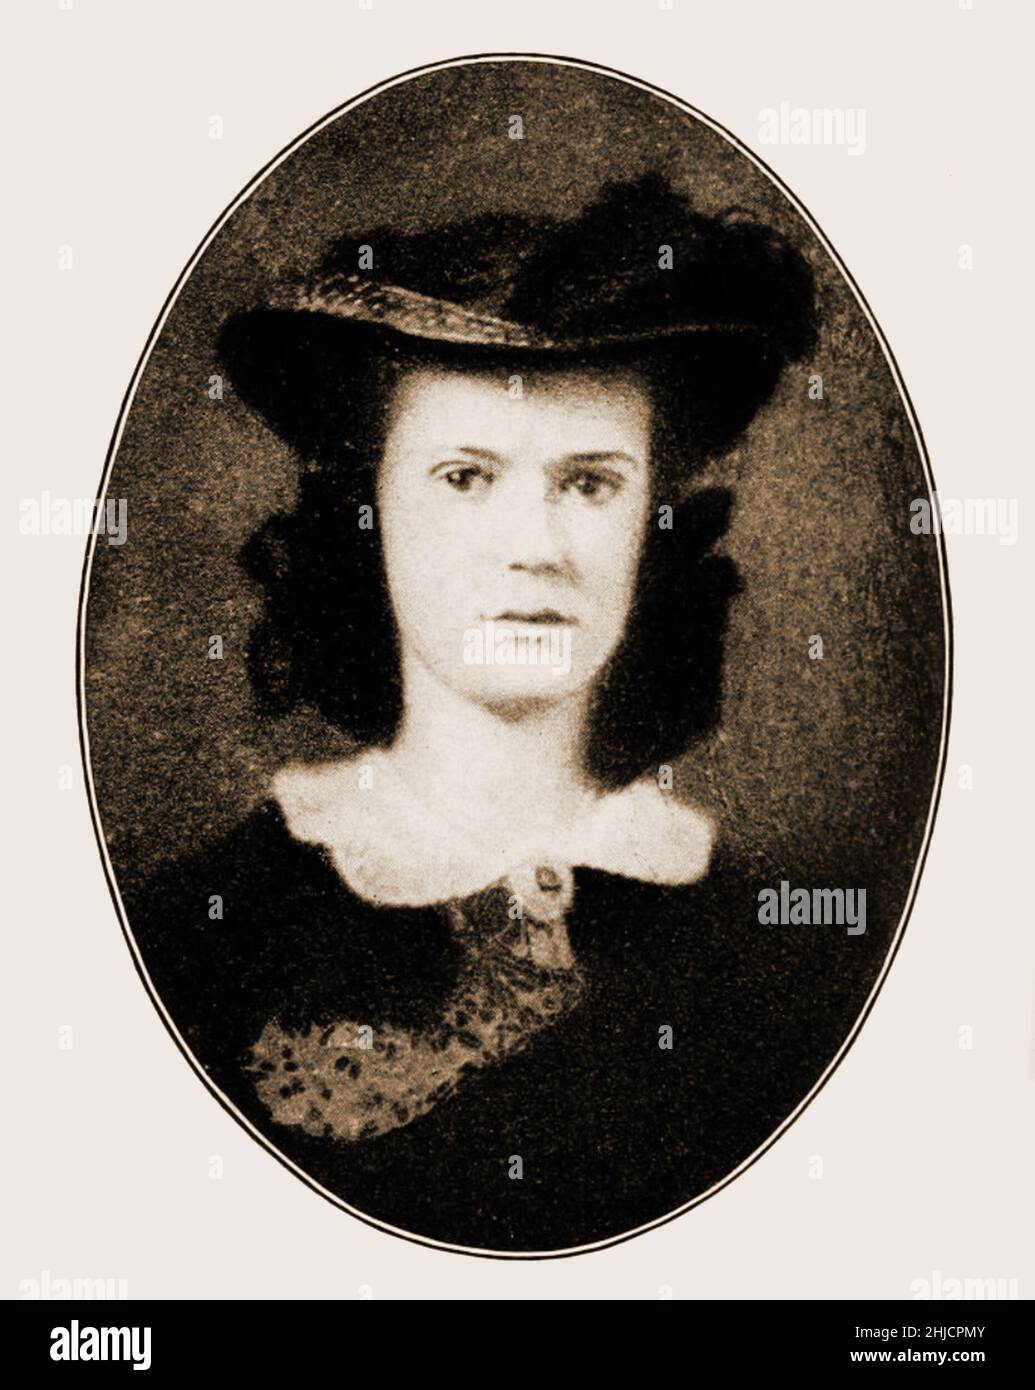 American Sarah Morgan Dawson (1842-1909) is known for keeping a diary from March 1862 to April 1865 during the Civil War, published now as A Confederate Girl‚Äôs Diary. It offers one of the most detailed accounts of life in Louisiana during the Civil War. Stock Photo